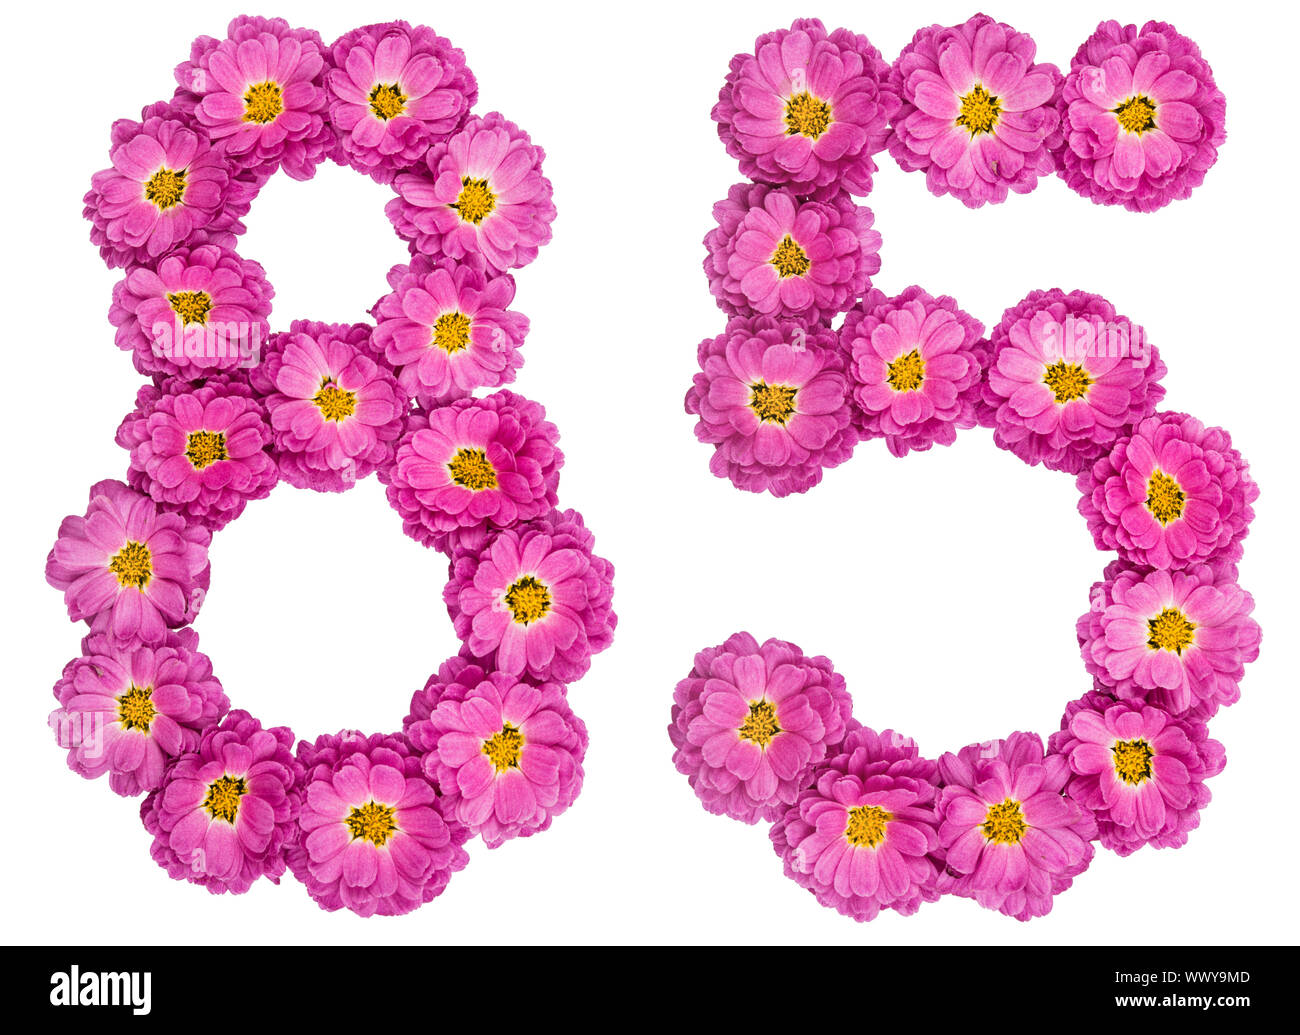 Arabic numeral 85, eighty five, from flowers of chrysanthemum, isolated on white background Stock Photo